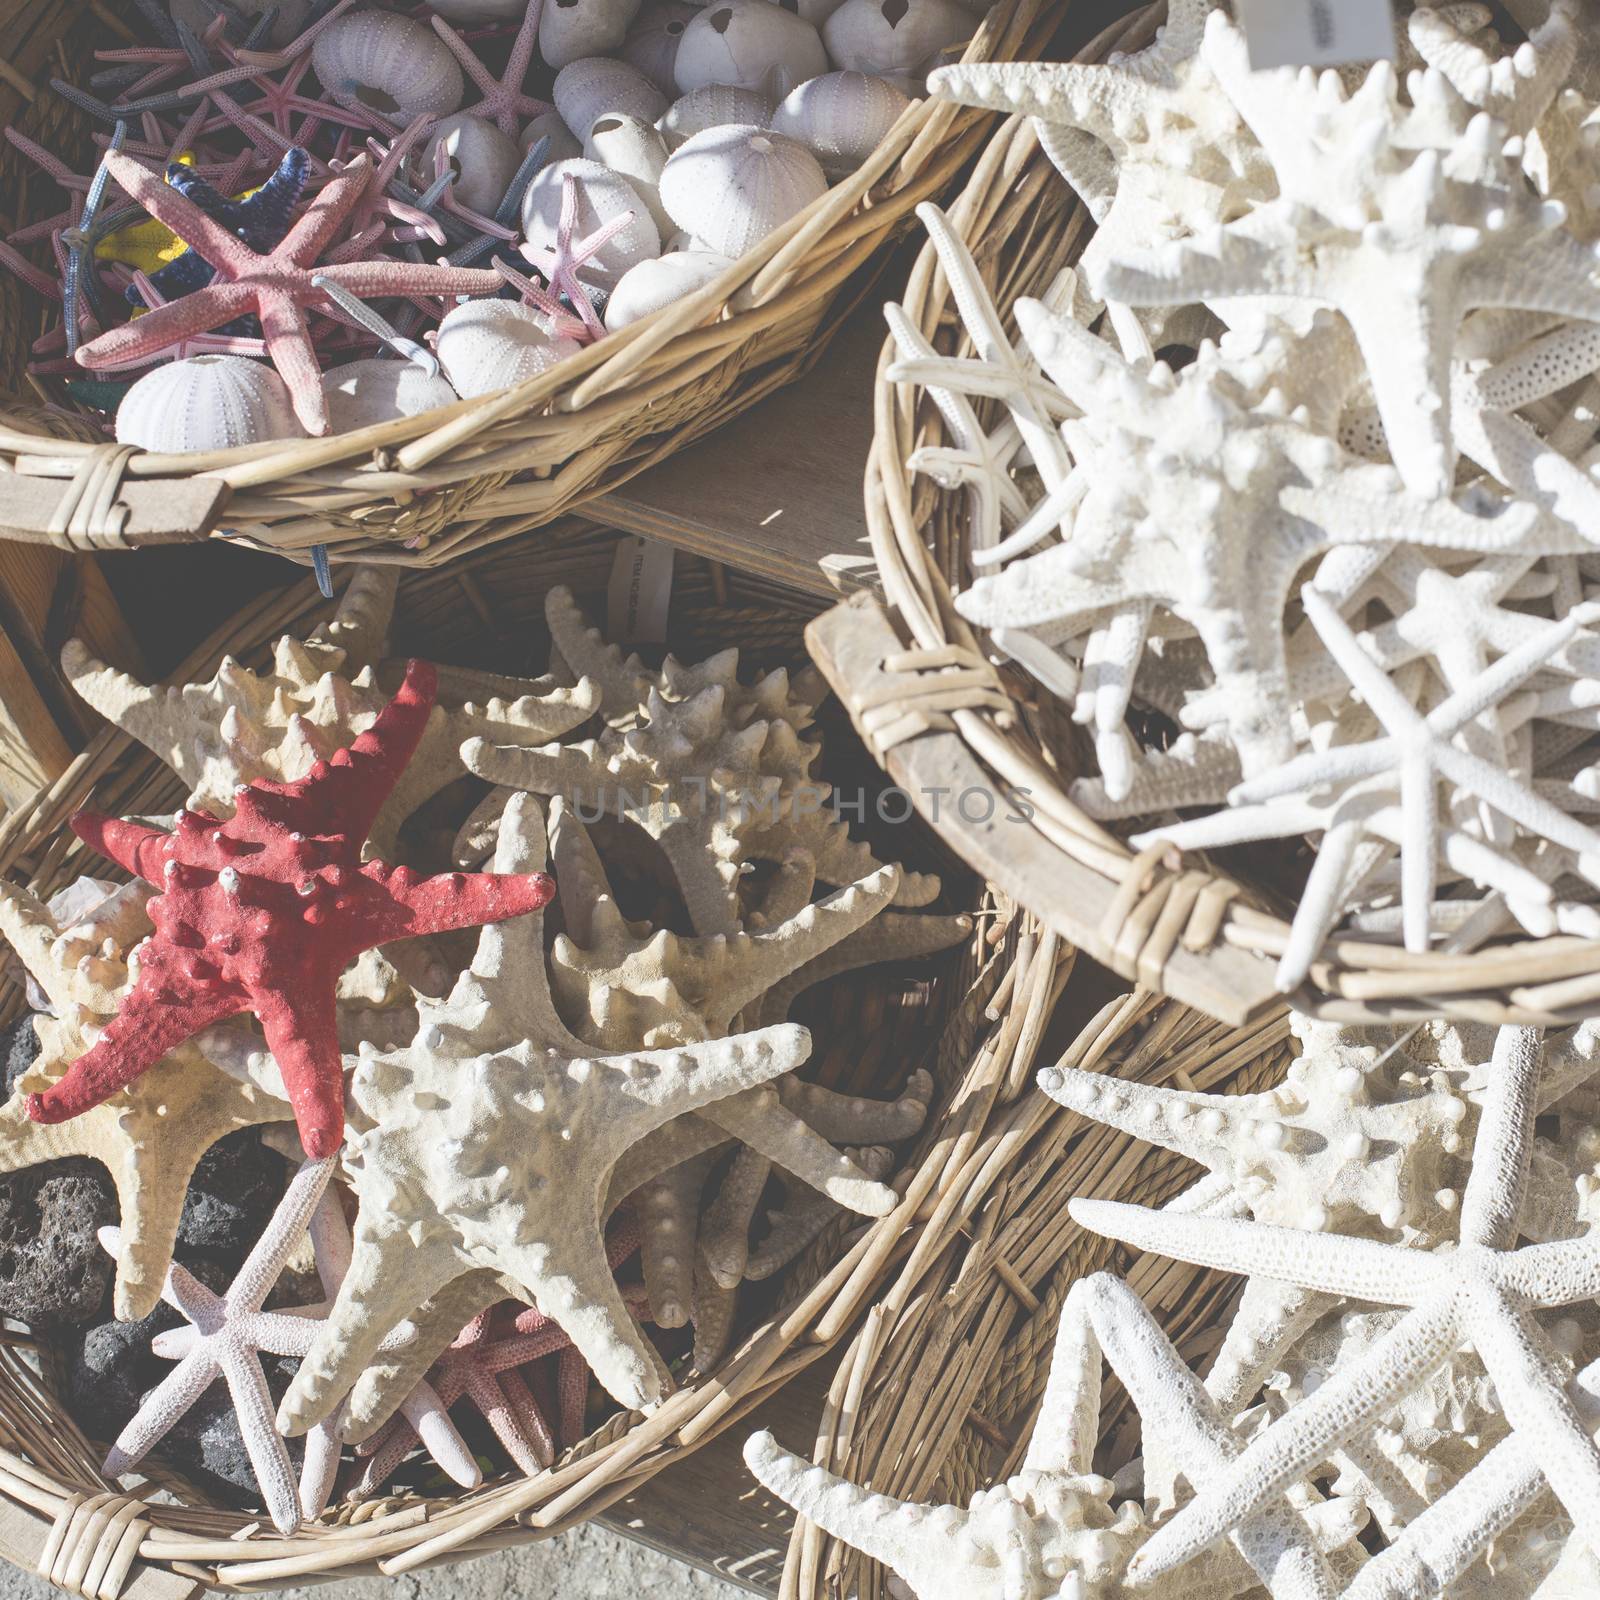 Starfish and seashells souvenirs for sale

